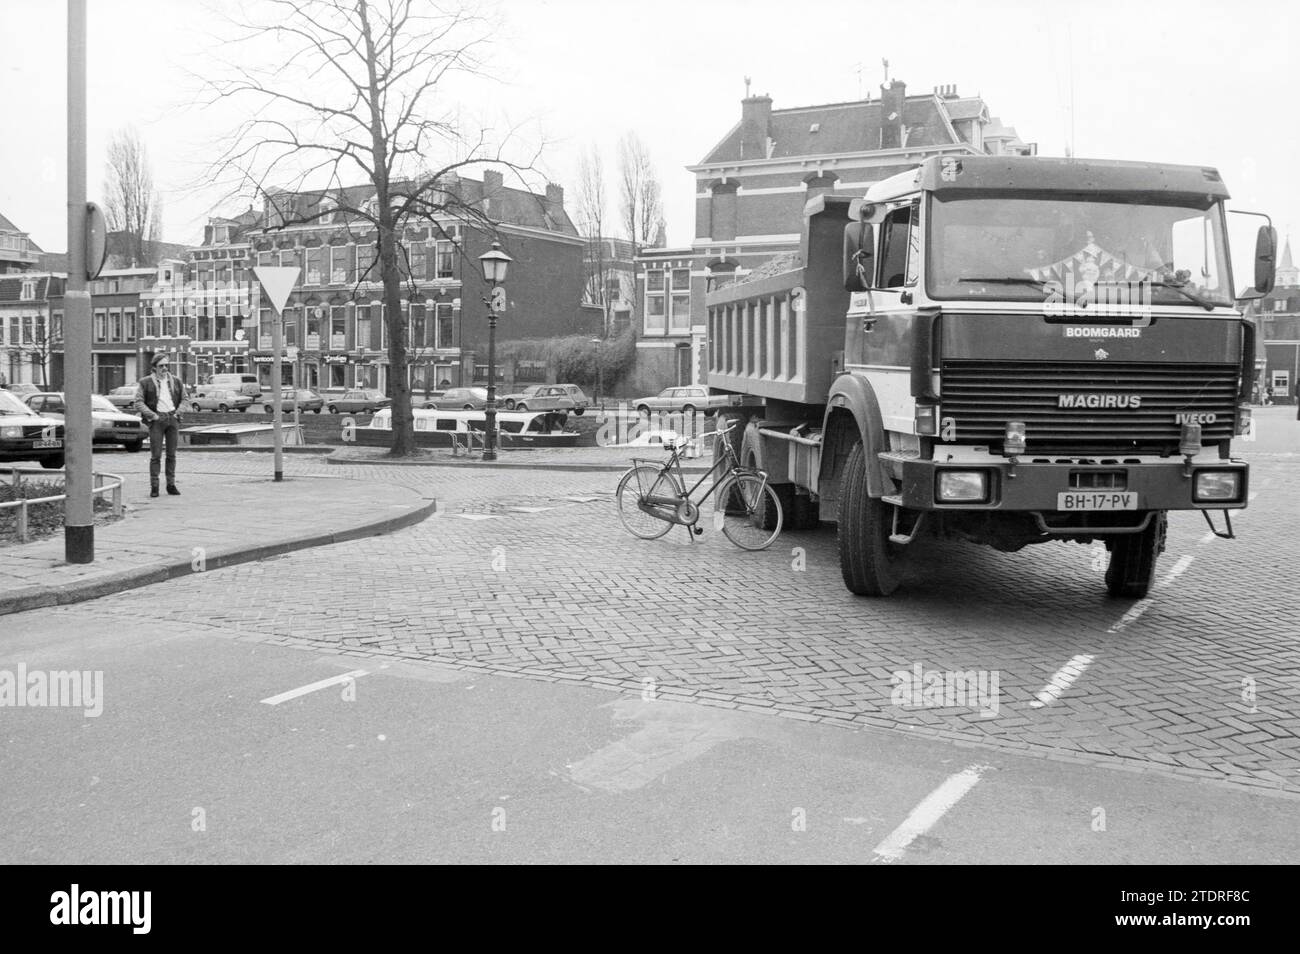 Truck, Whizgle News from the Past, Tailored for the Future. Explore historical narratives, Dutch The Netherlands agency image with a modern perspective, bridging the gap between yesterday's events and tomorrow's insights. A timeless journey shaping the stories that shape our future Stock Photo